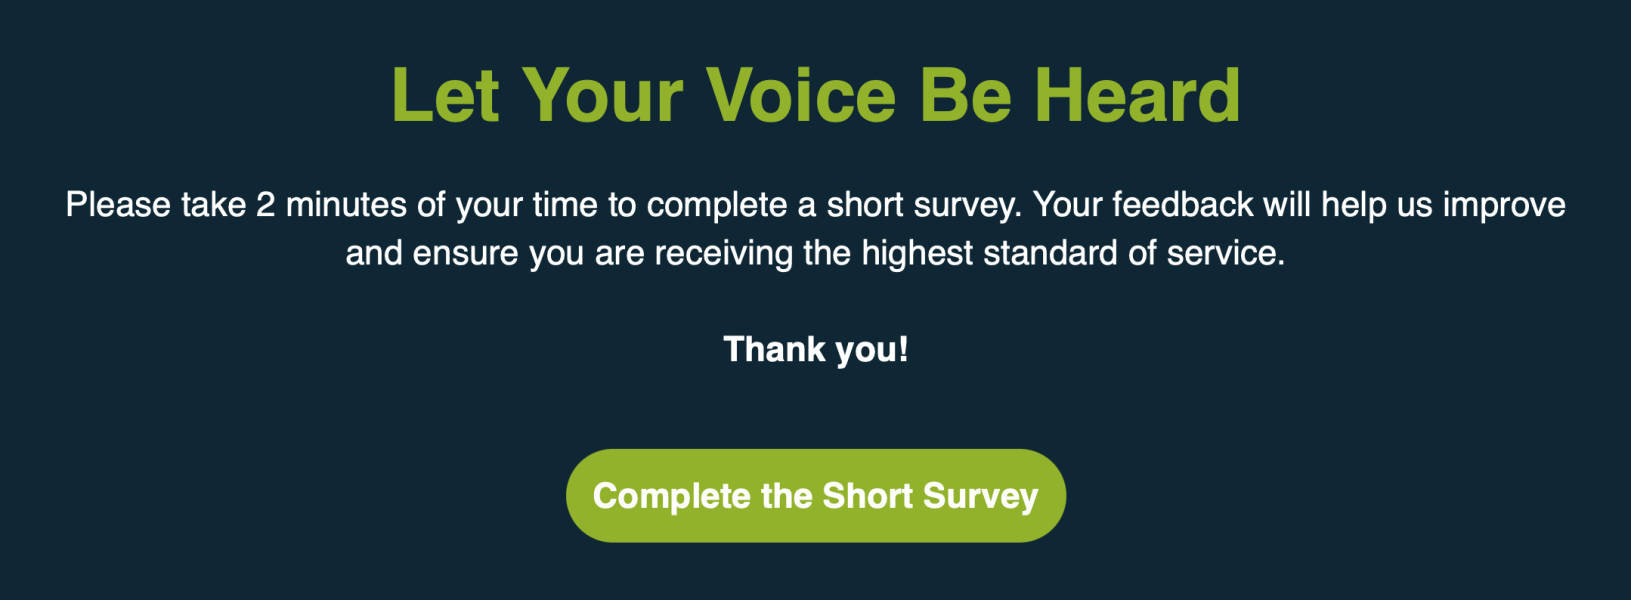 Let Your Voice Be Heard! Your feedback will help us improve and ensure you are receiving the highest standard of service. Complete the short survey.